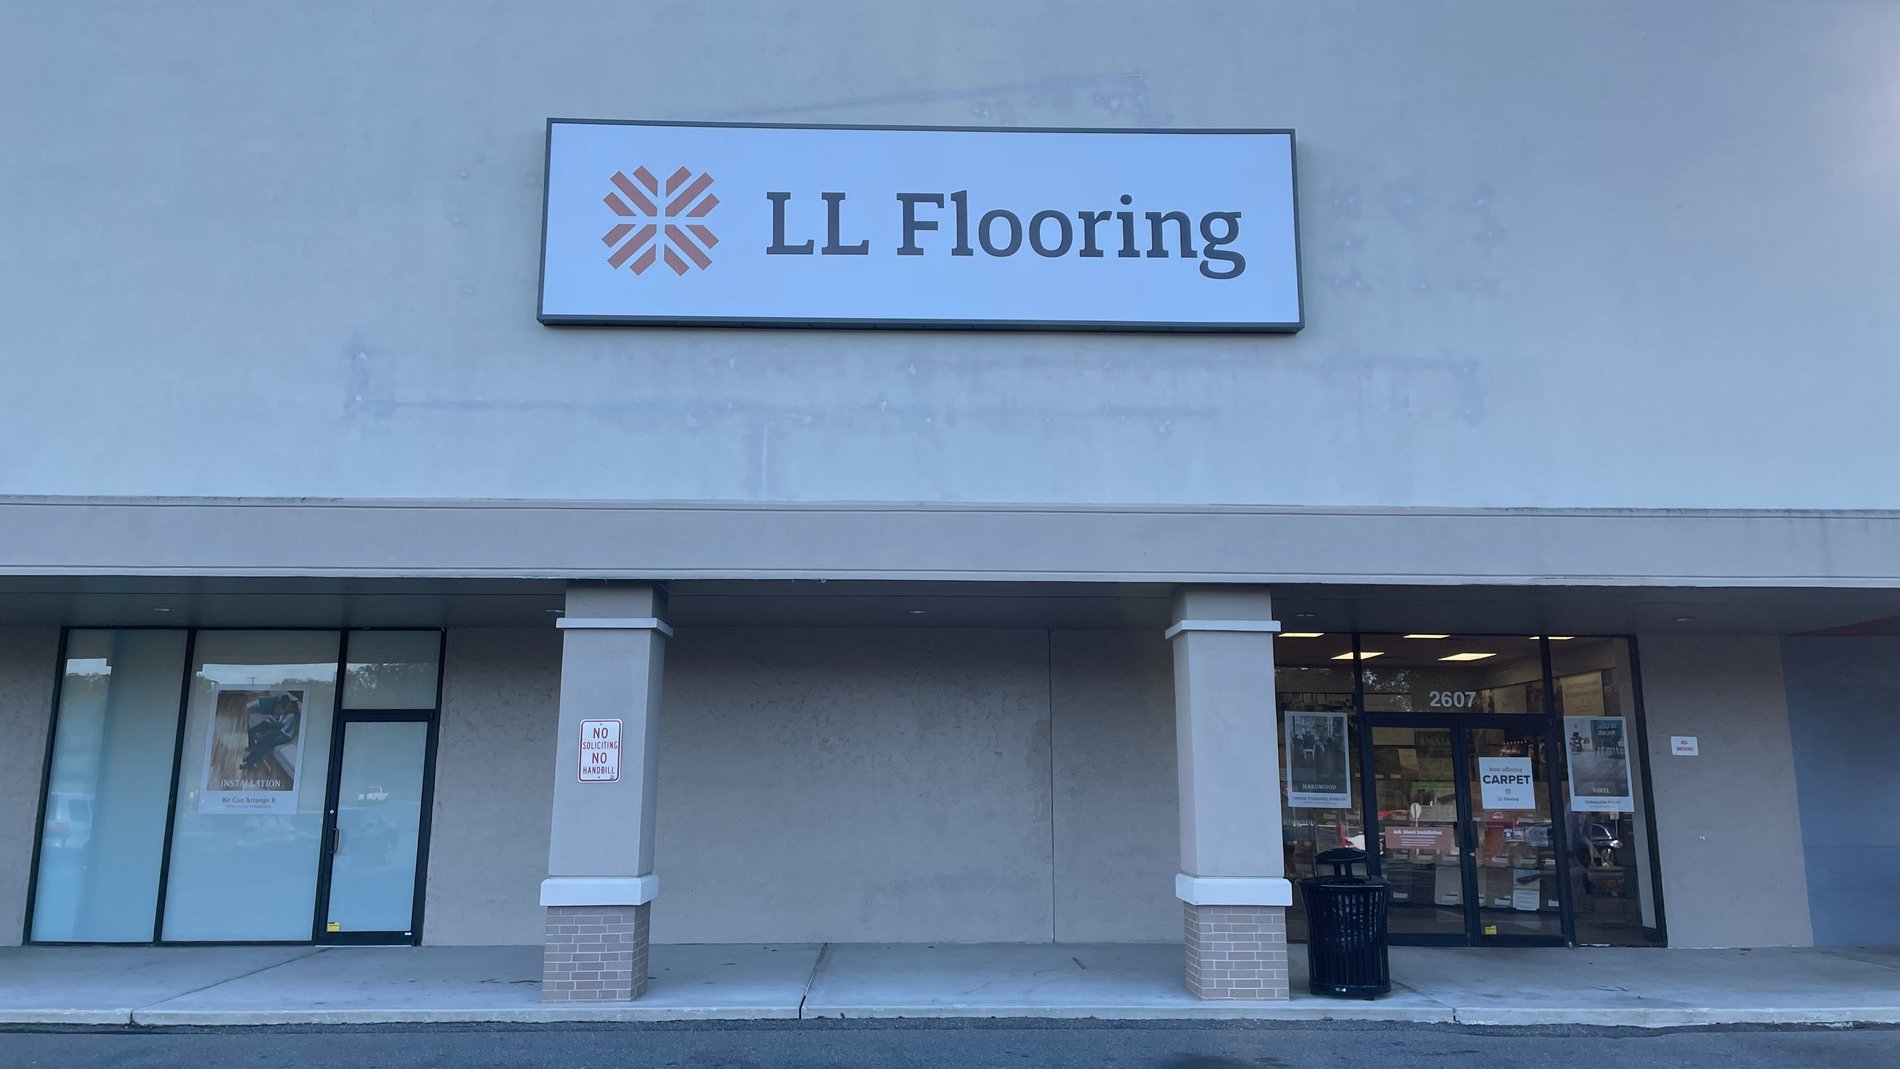 LL Flooring #1385 Gainesville | 2607 NW 13th Street | Storefront